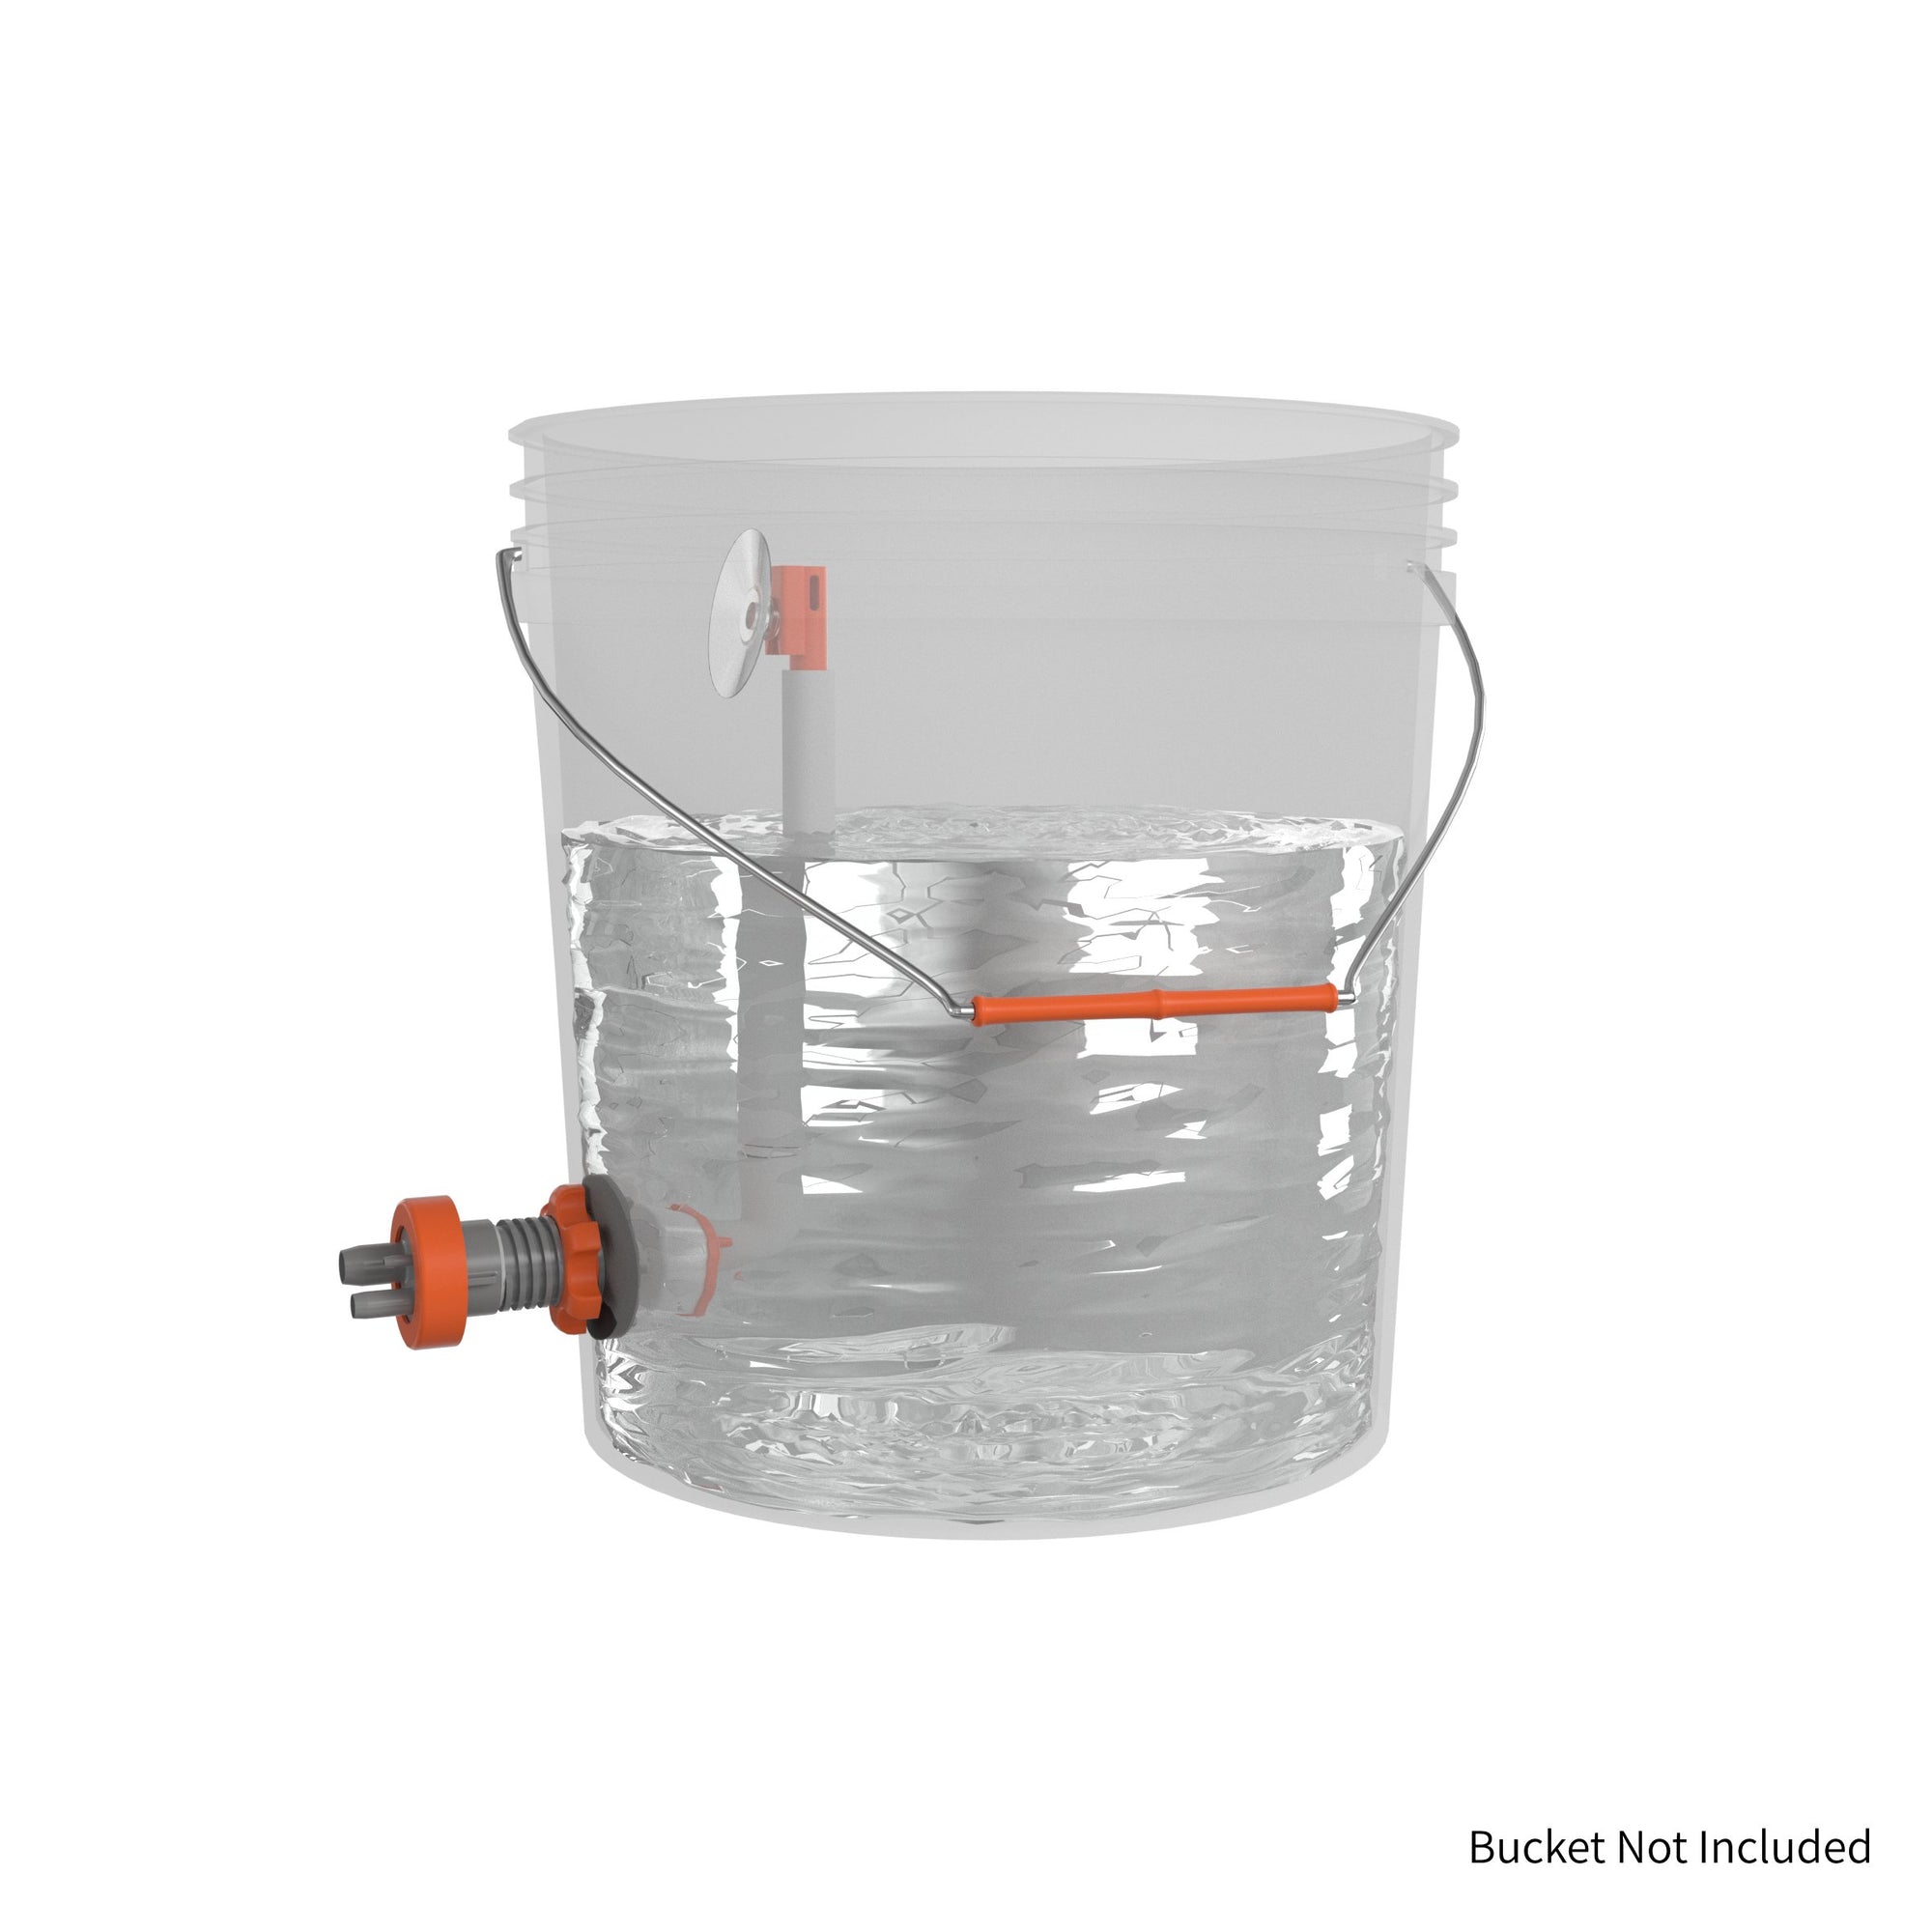 How to easily make a DIY Bucket Live Well for Fishing 